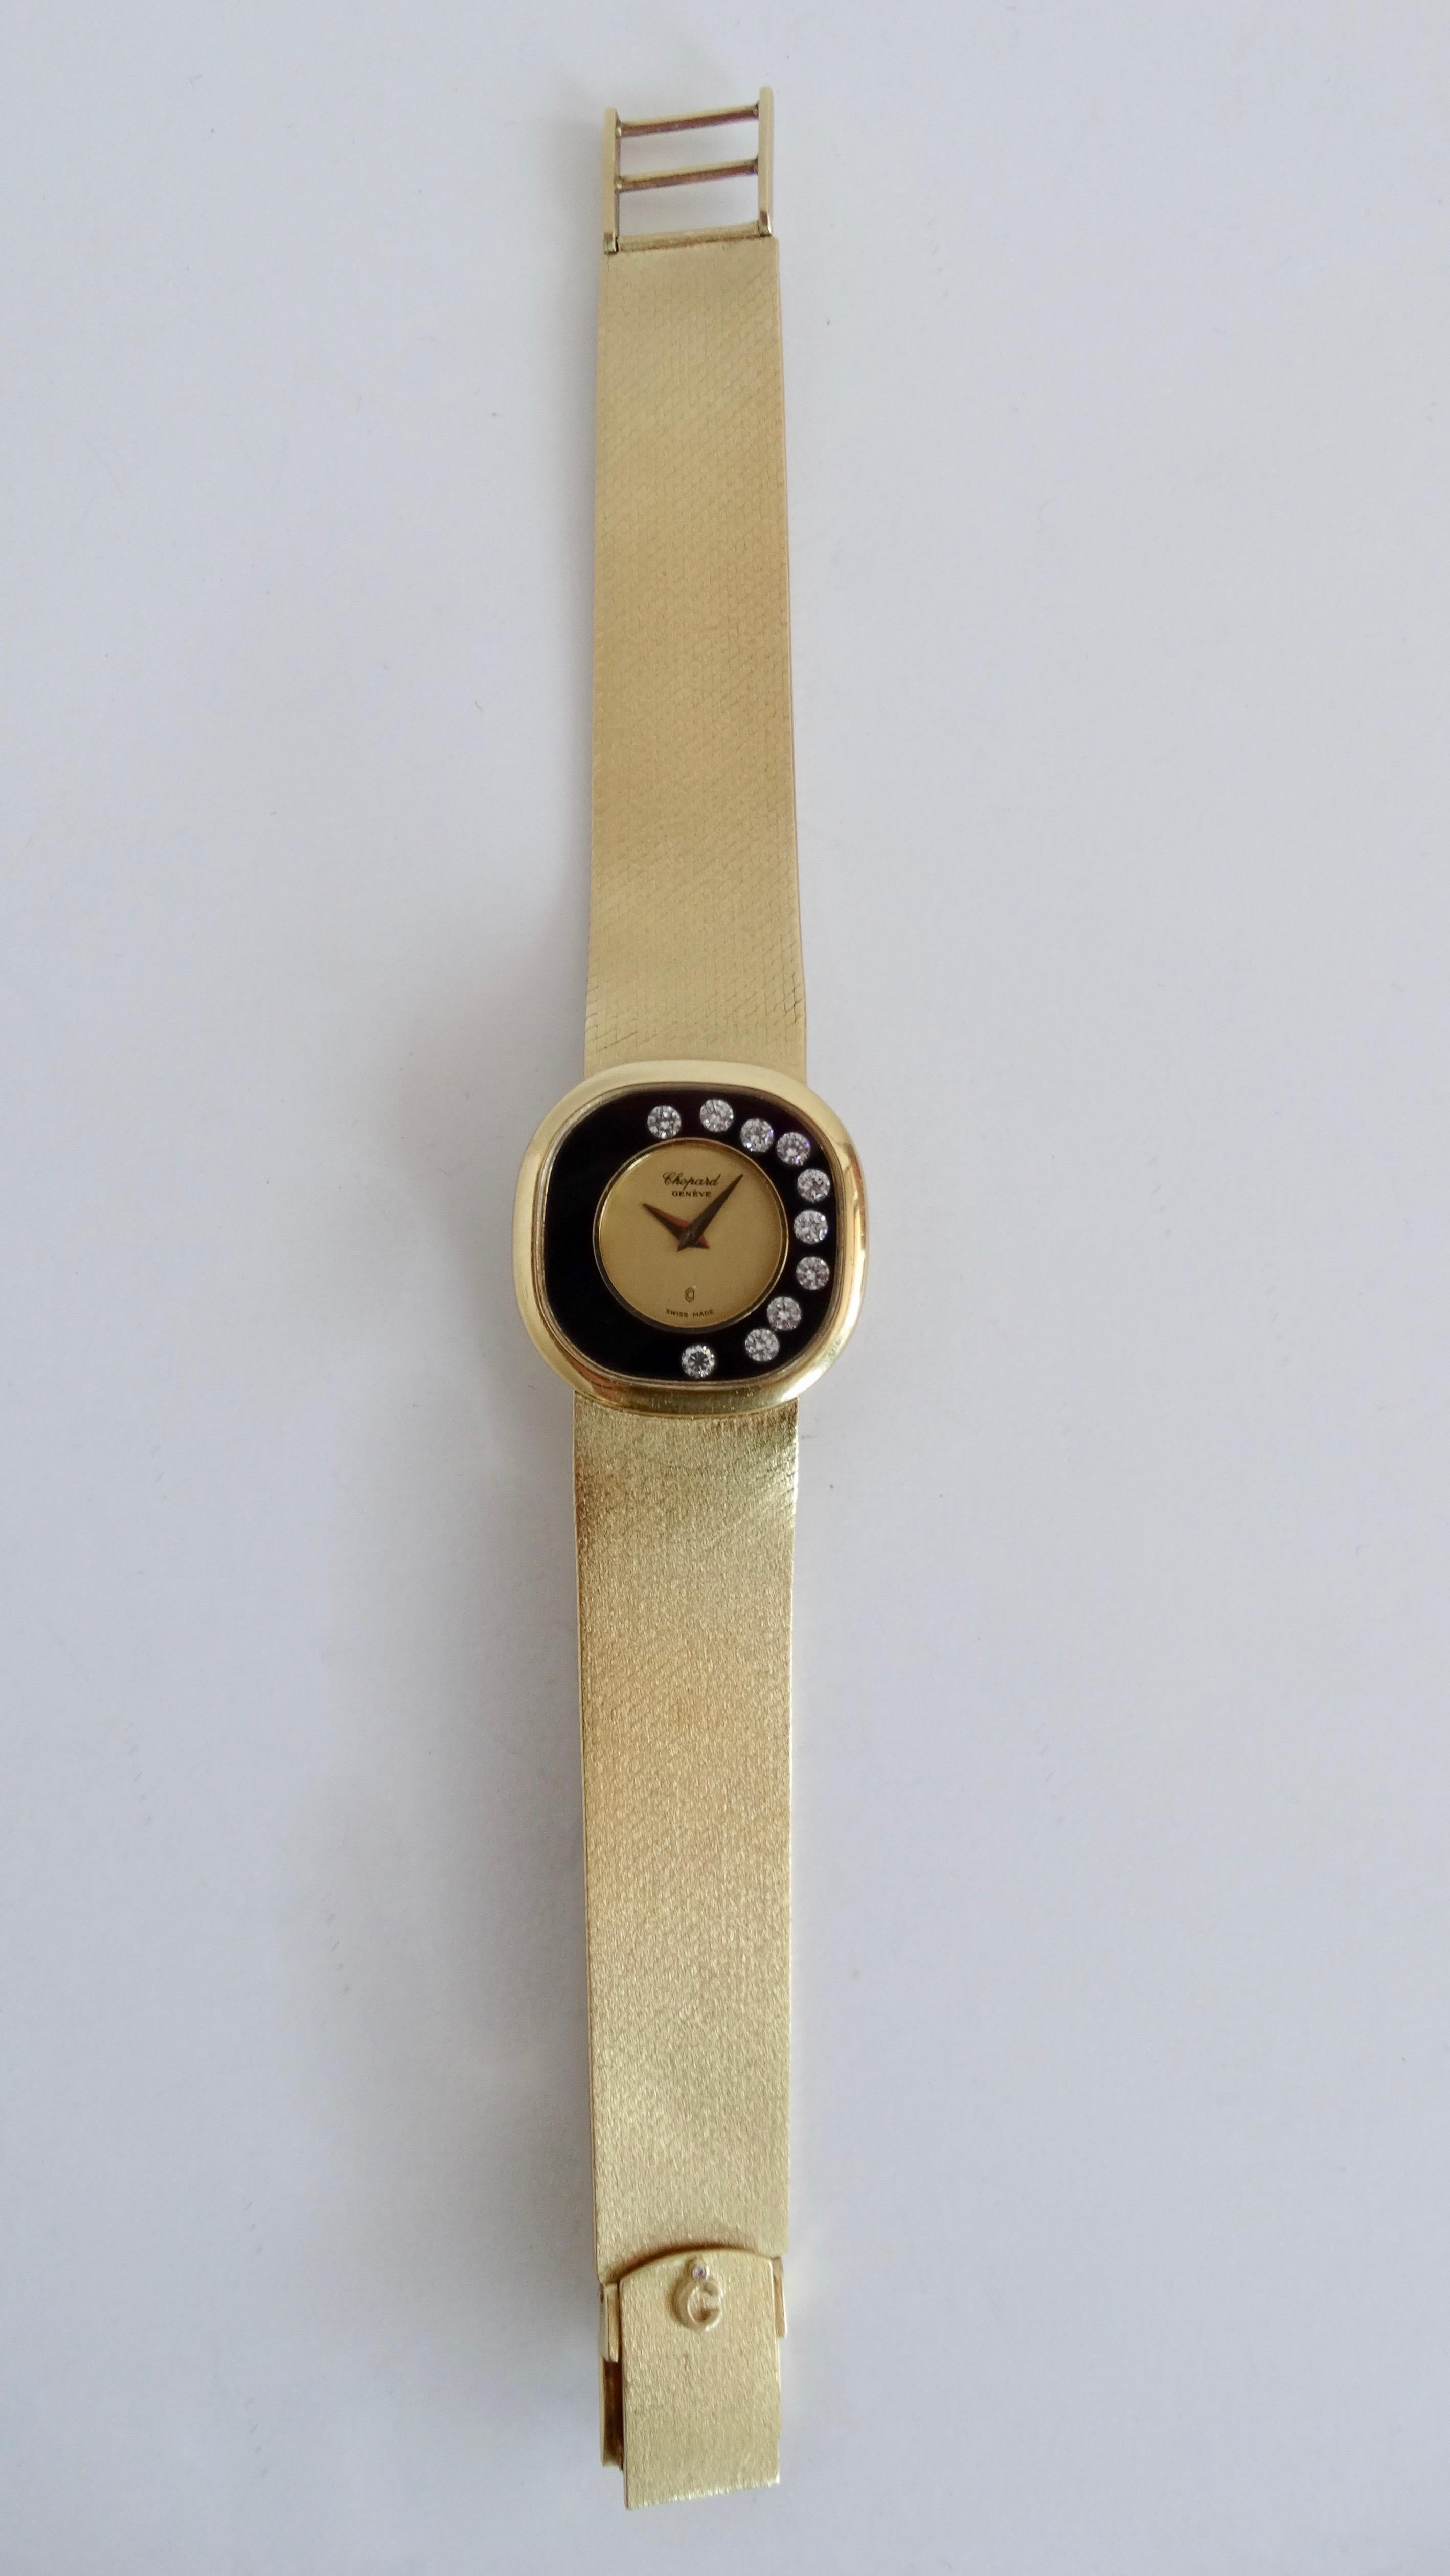 Add some sparkle to your jewelry collection with this 1980s Chopard watch! Circa 1976, the Happy Diamonds watch was debuted after Ronald Kurowski, a designer at Chopard, was inspired by a waterfall. Swiss made and crafted from 18K yellow gold, the